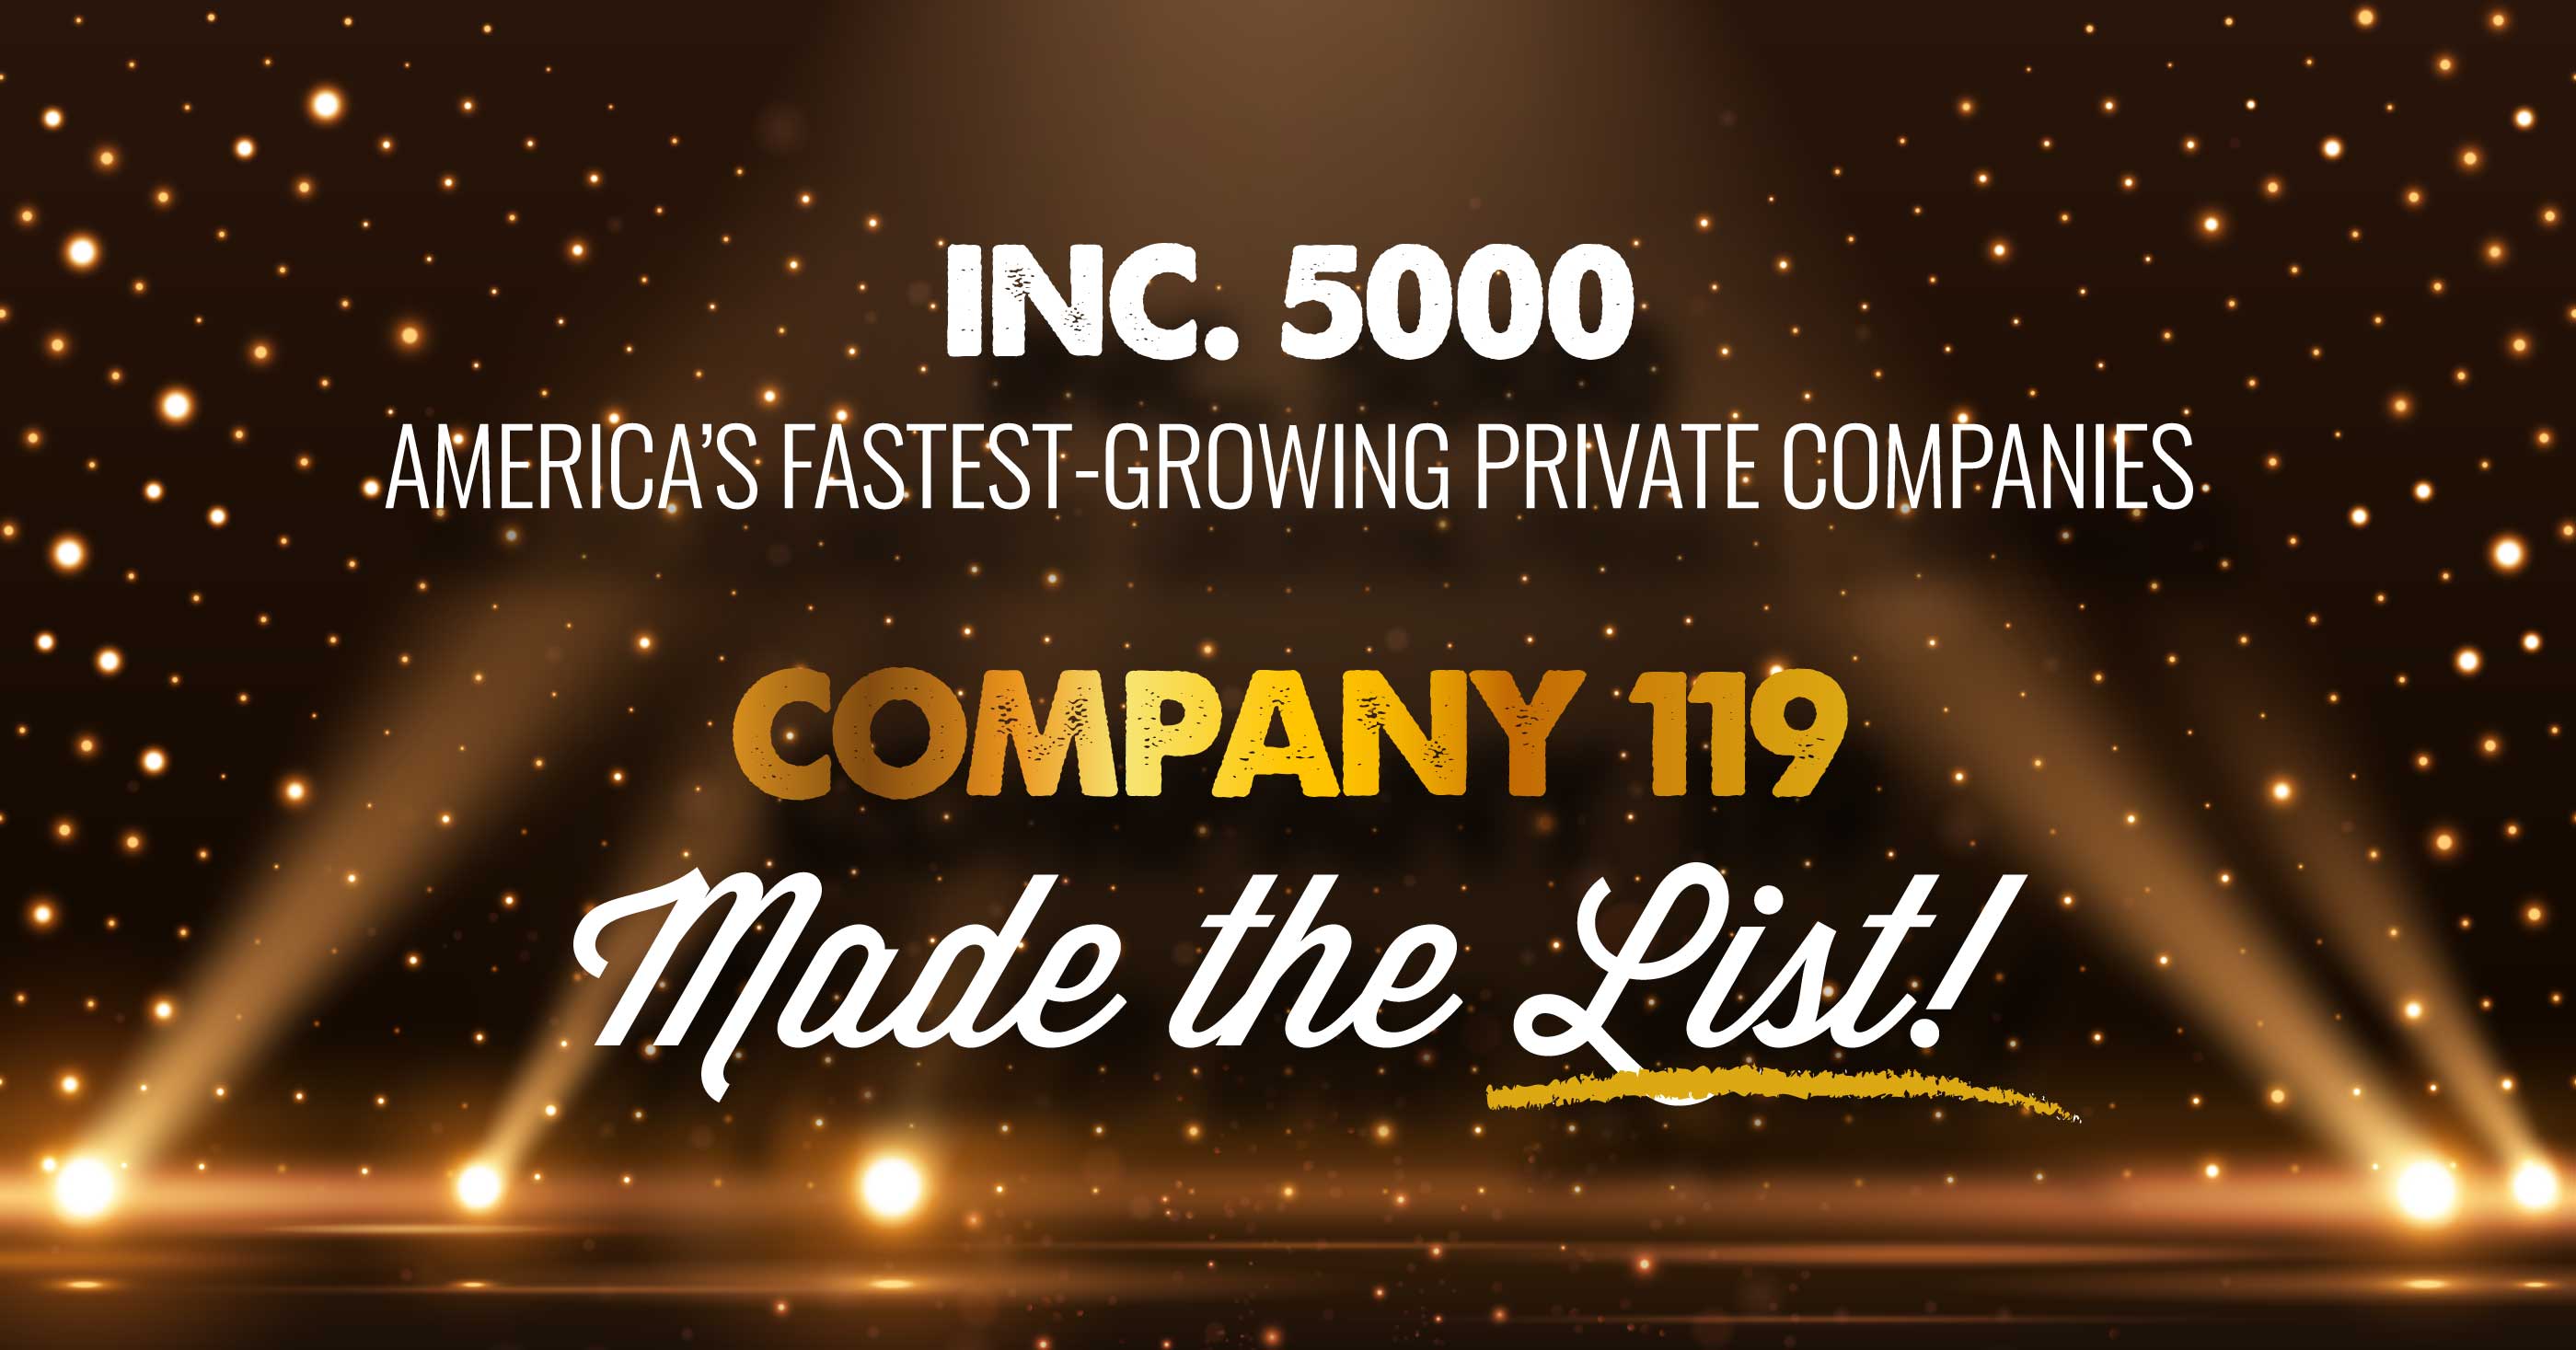 Company 119 Named to the Inc. 5000 List for 2022 | Company 119